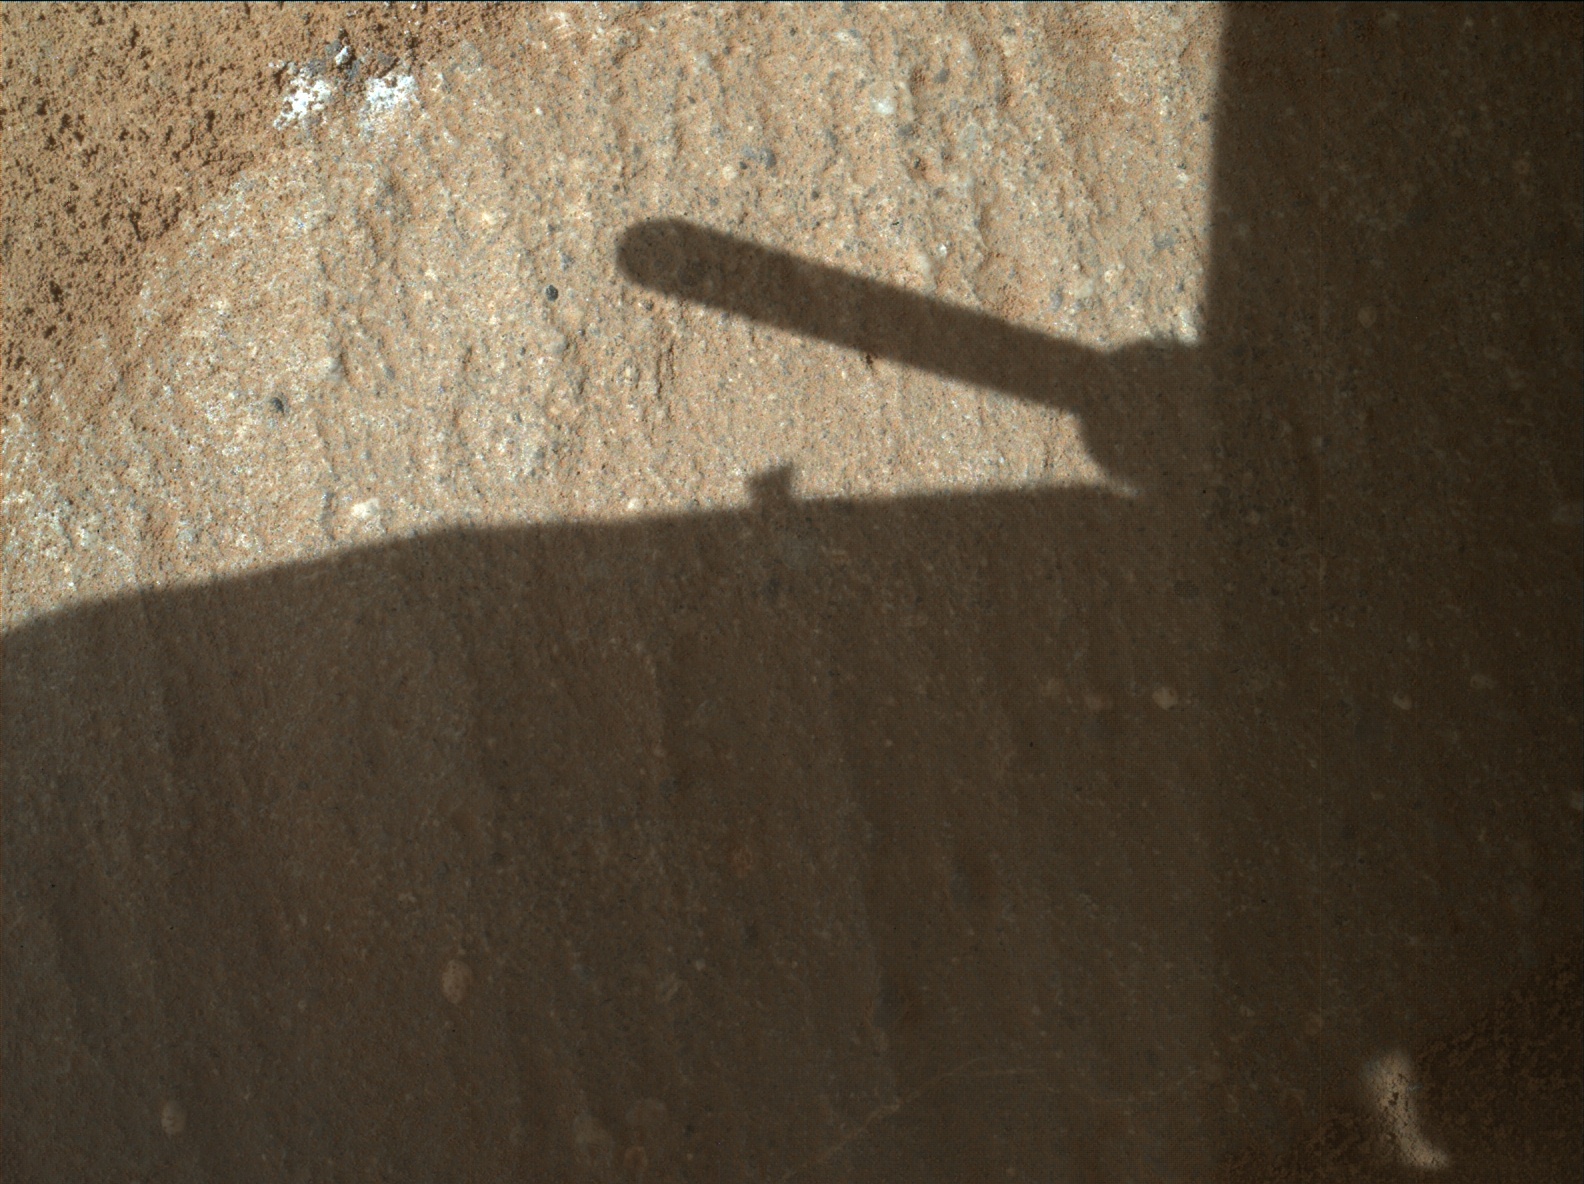 Nasa's Mars rover Curiosity acquired this image using its Mars Hand Lens Imager (MAHLI) on Sol 1319